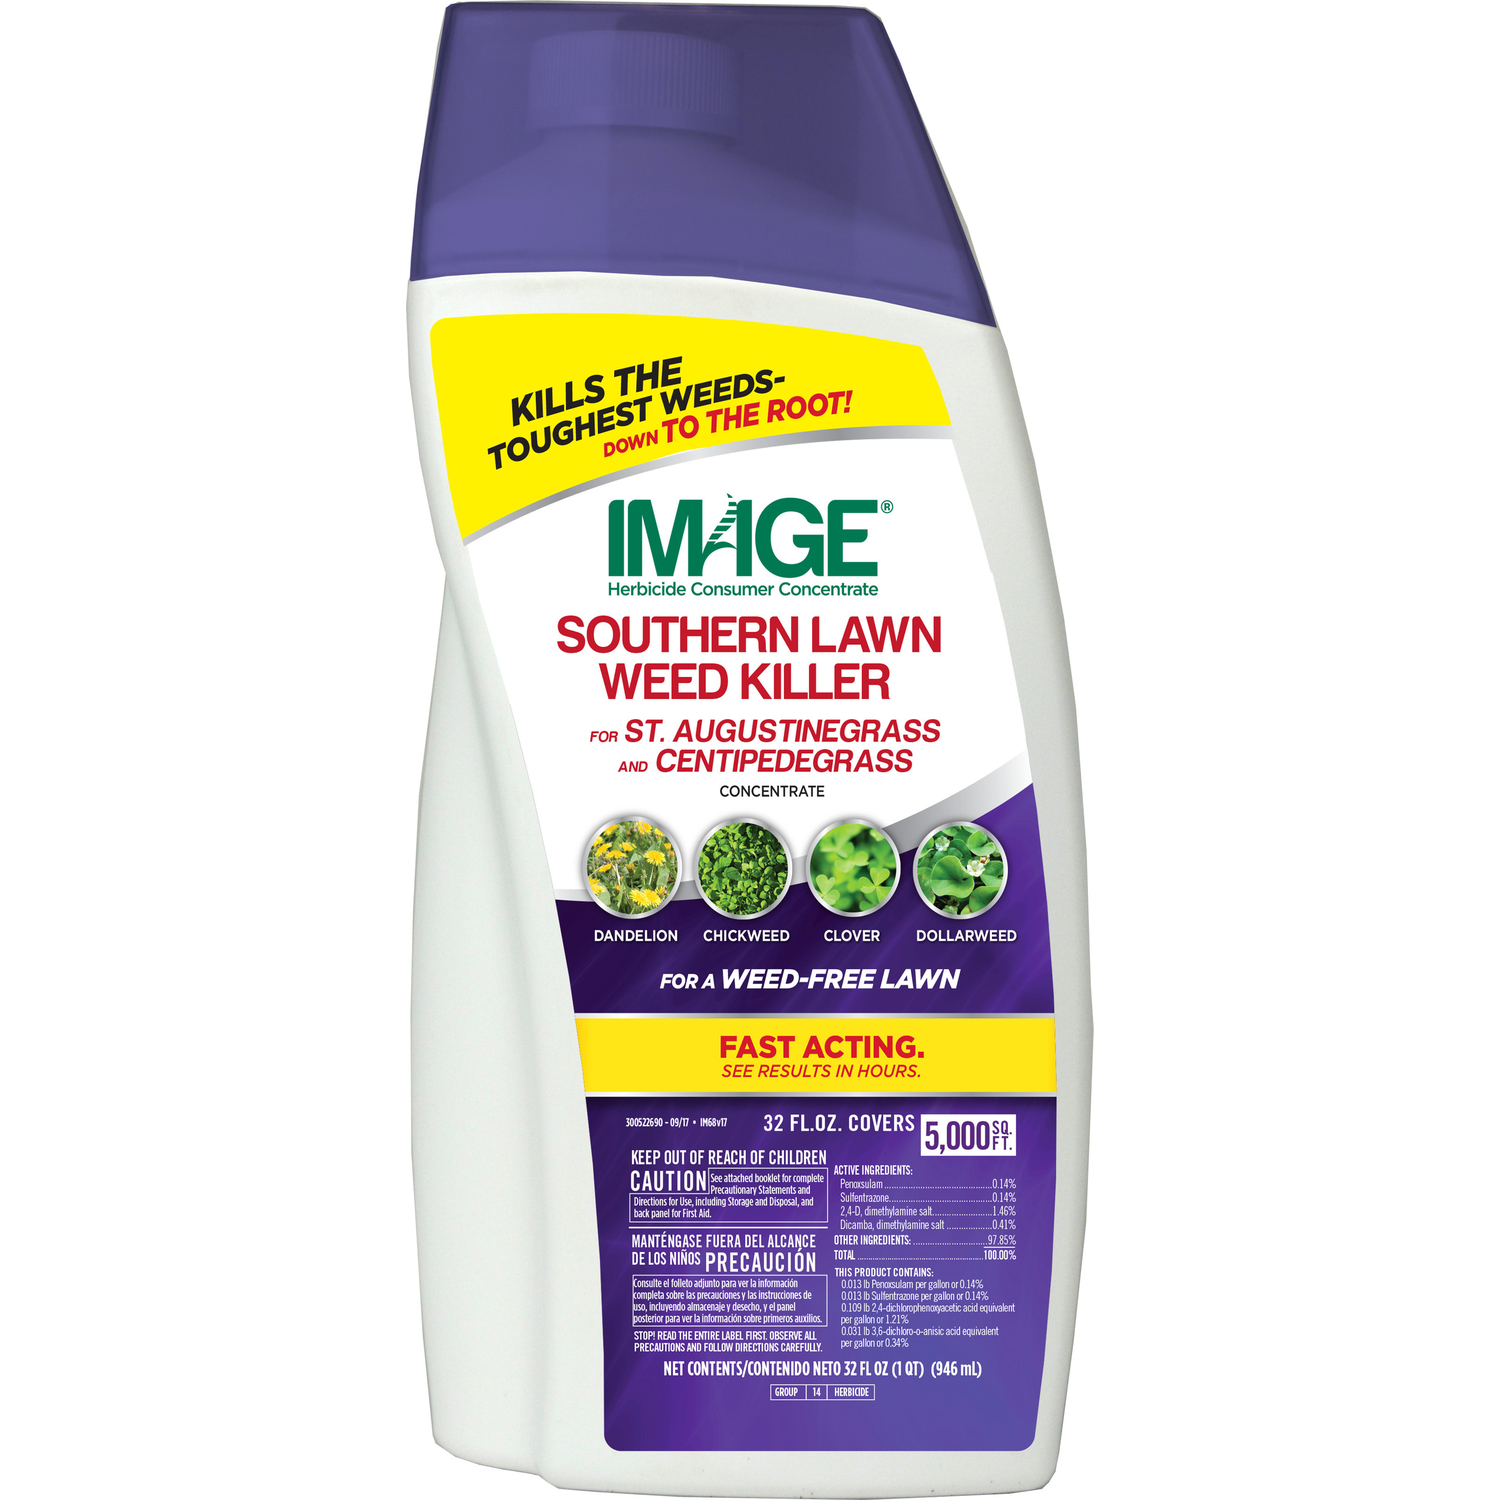 UPC 813576004262 product image for Image Concentrate Southern Lawn Weed Killer 32 oz. | upcitemdb.com